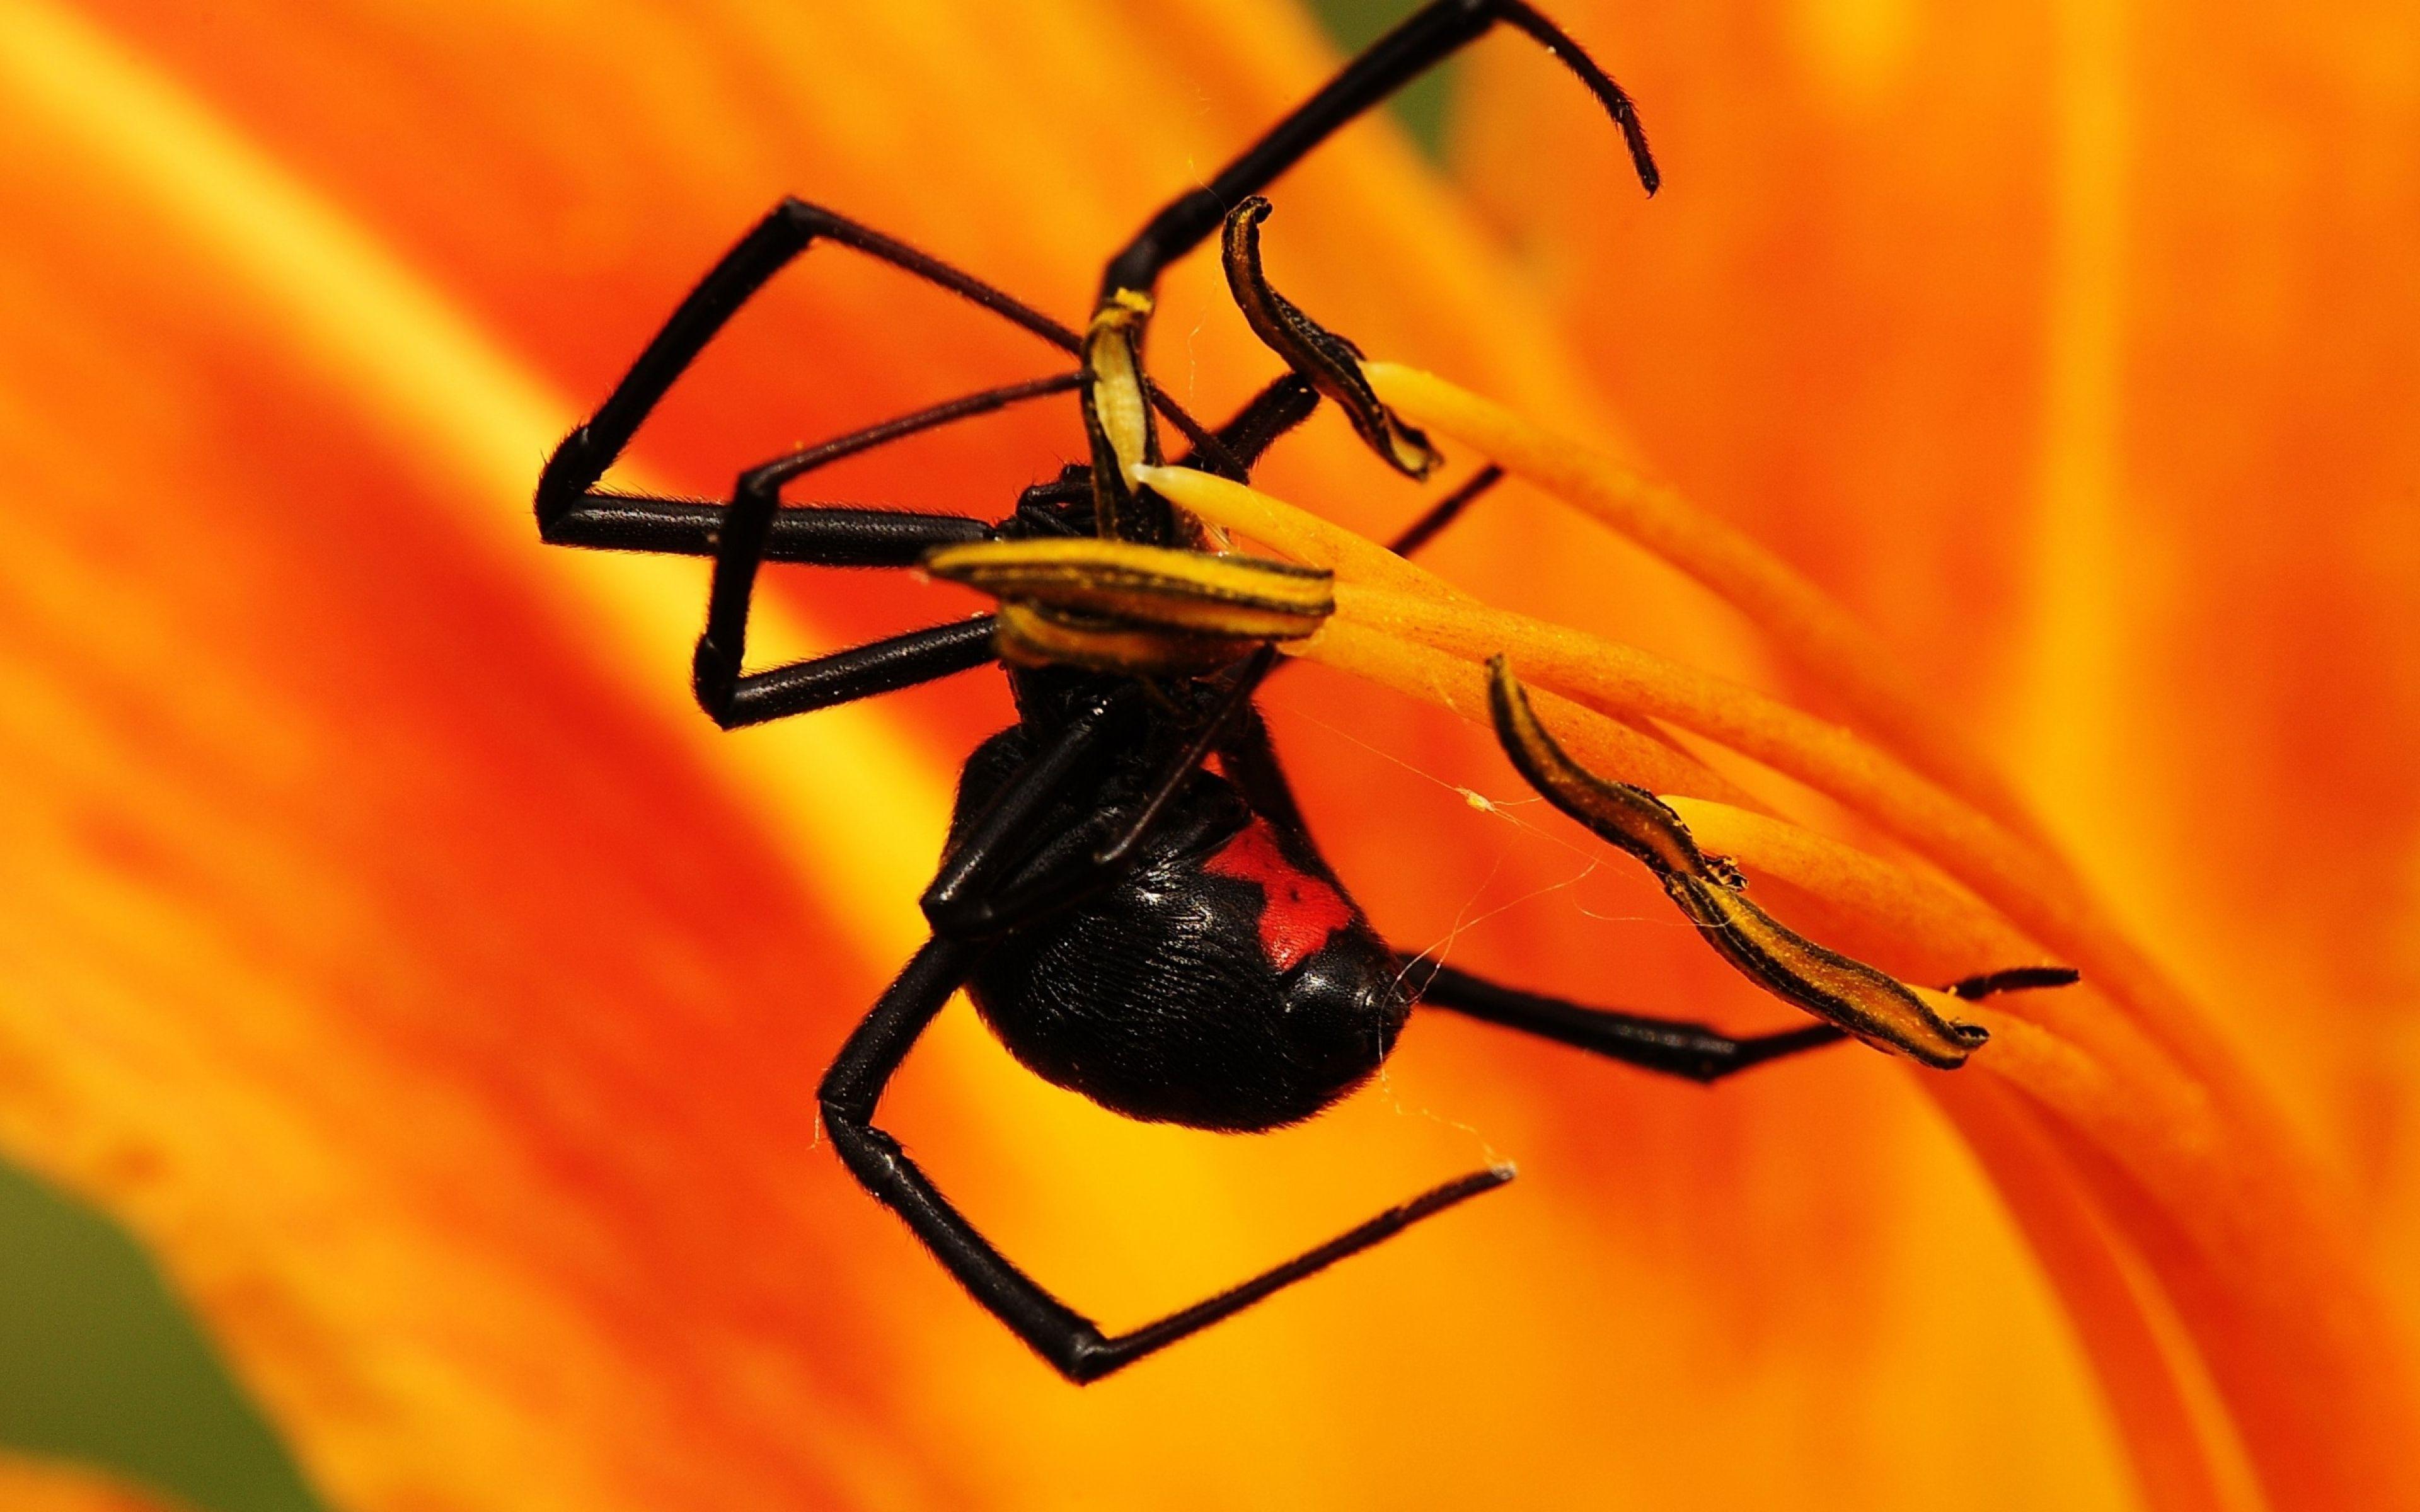 HDQ Wallpaper: Insect Wallpaper, Insect Image For Desktop, Free